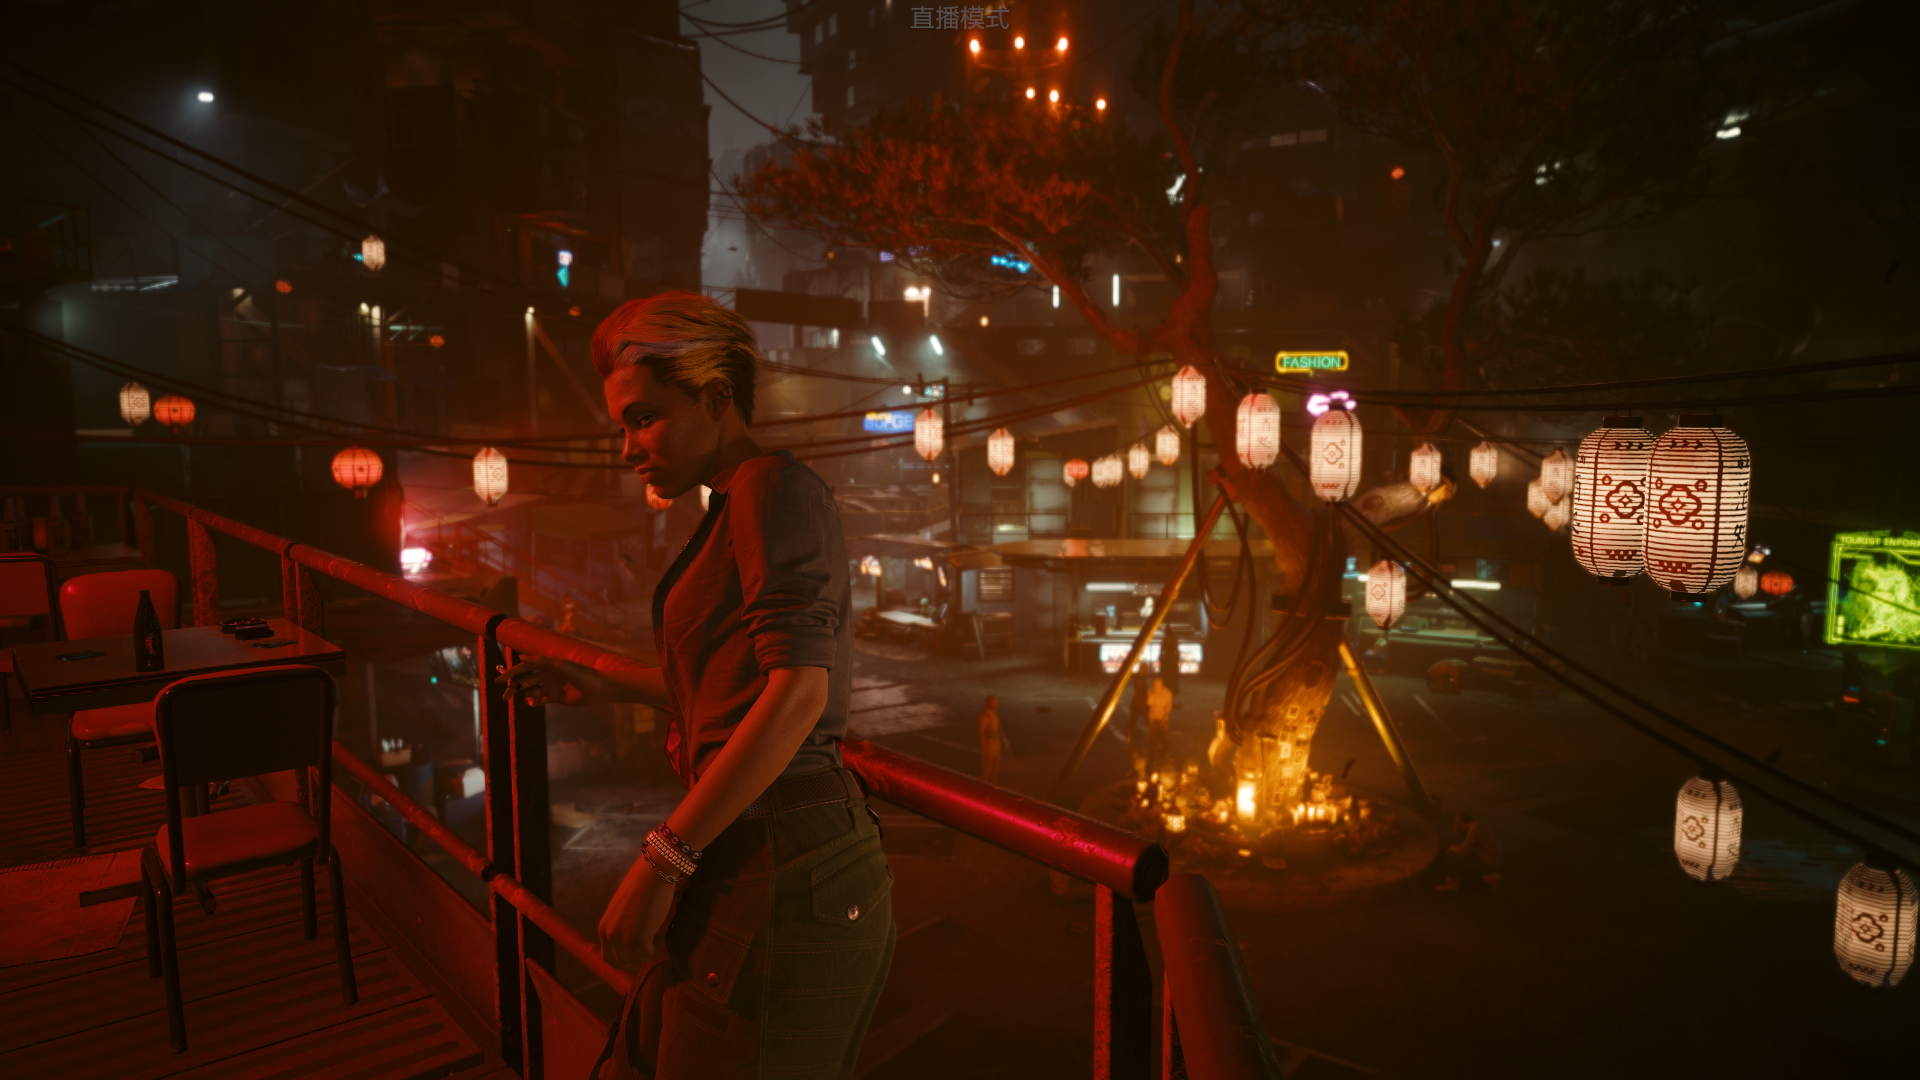 General 1920x1080 Cyberpunk 2077 neon short hair women video game characters CGI video game art screen shot low light video games standing rolled sleeves bracelets table chair video game girls sky lanterns lantern wires